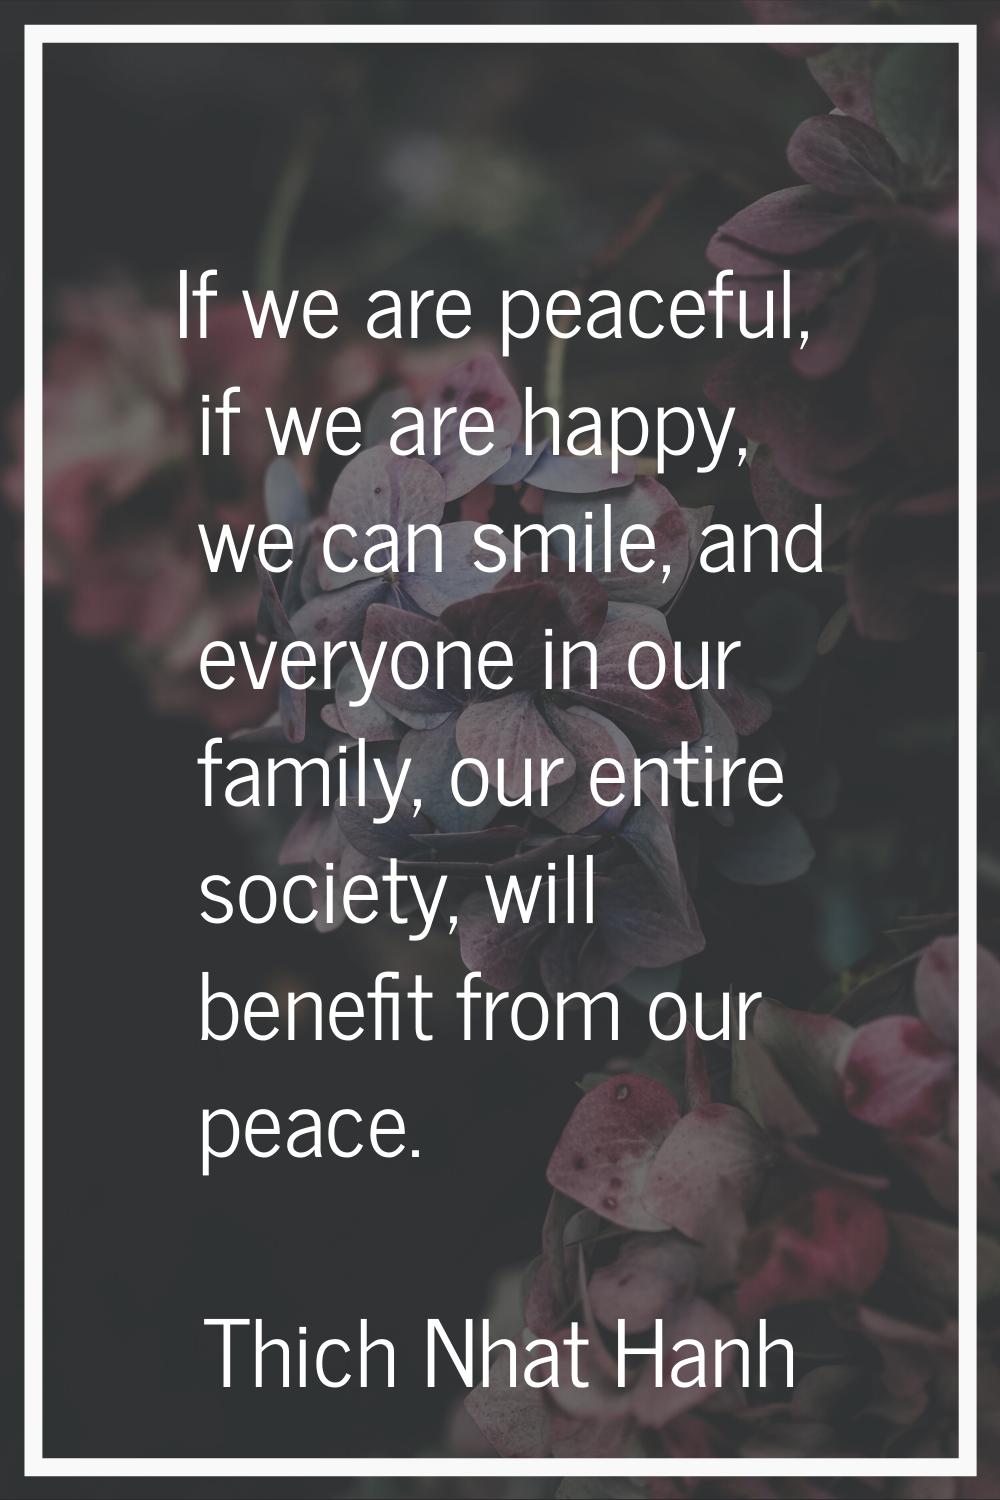 If we are peaceful, if we are happy, we can smile, and everyone in our family, our entire society, 